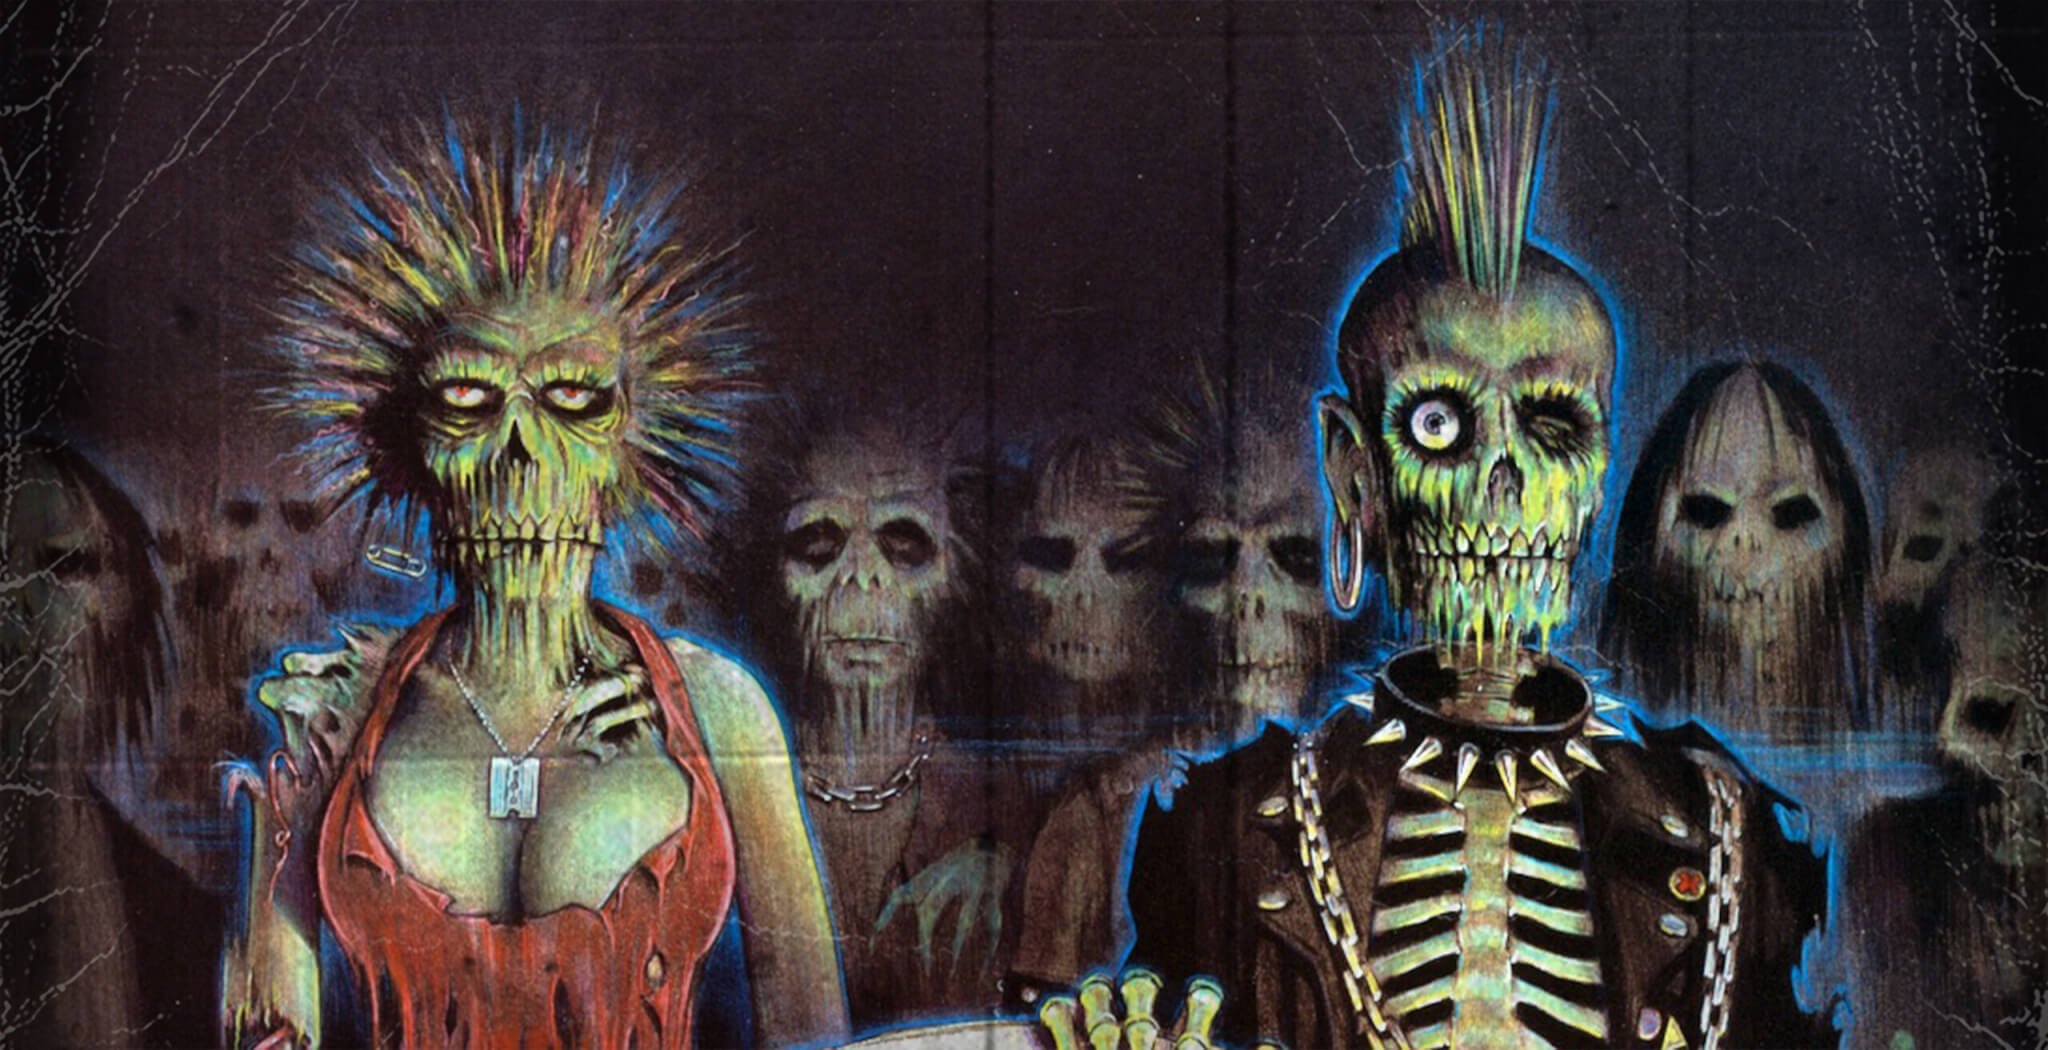 Return of The Living Dead for Title's Tales of Terror